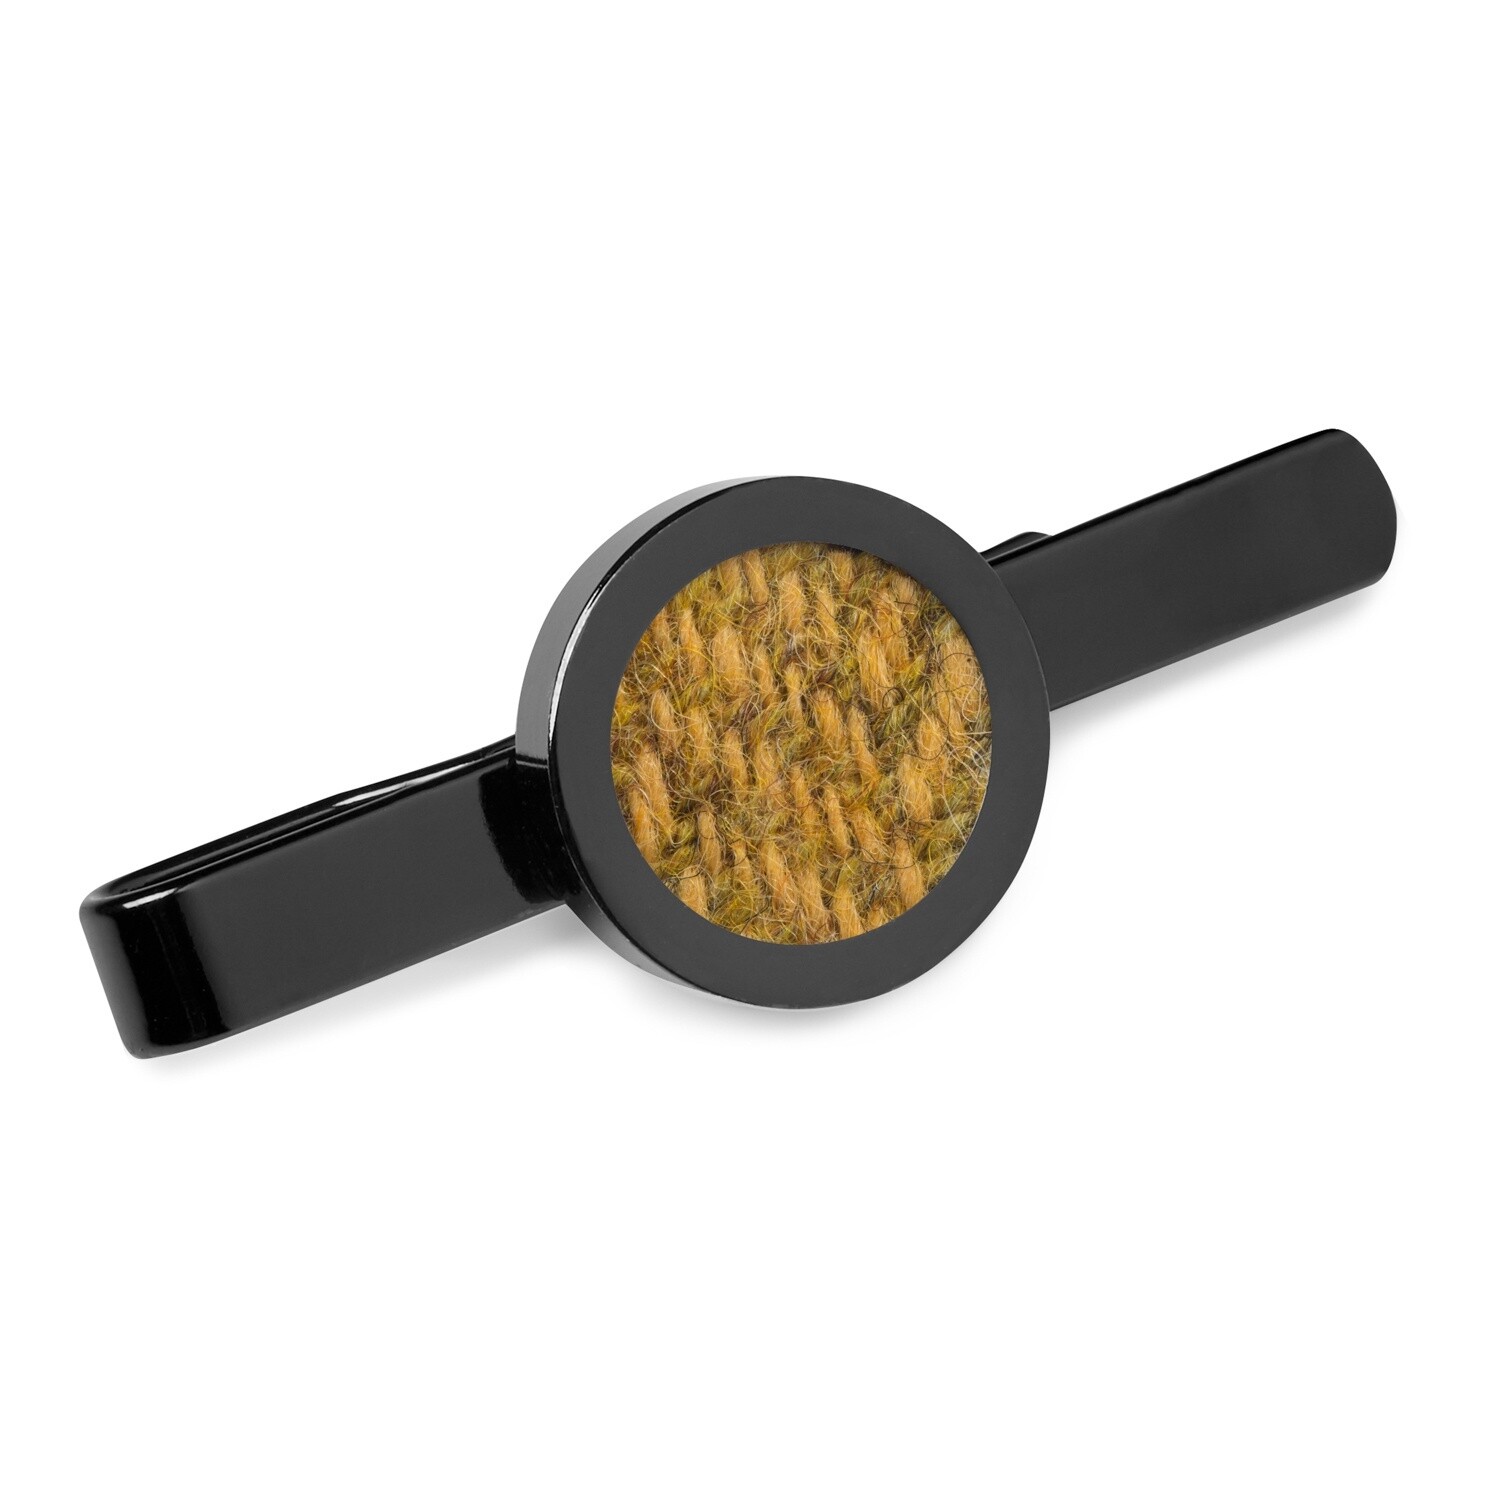 Donegal Tweed Tie Slide, Colour: AMBER (YELLOW)